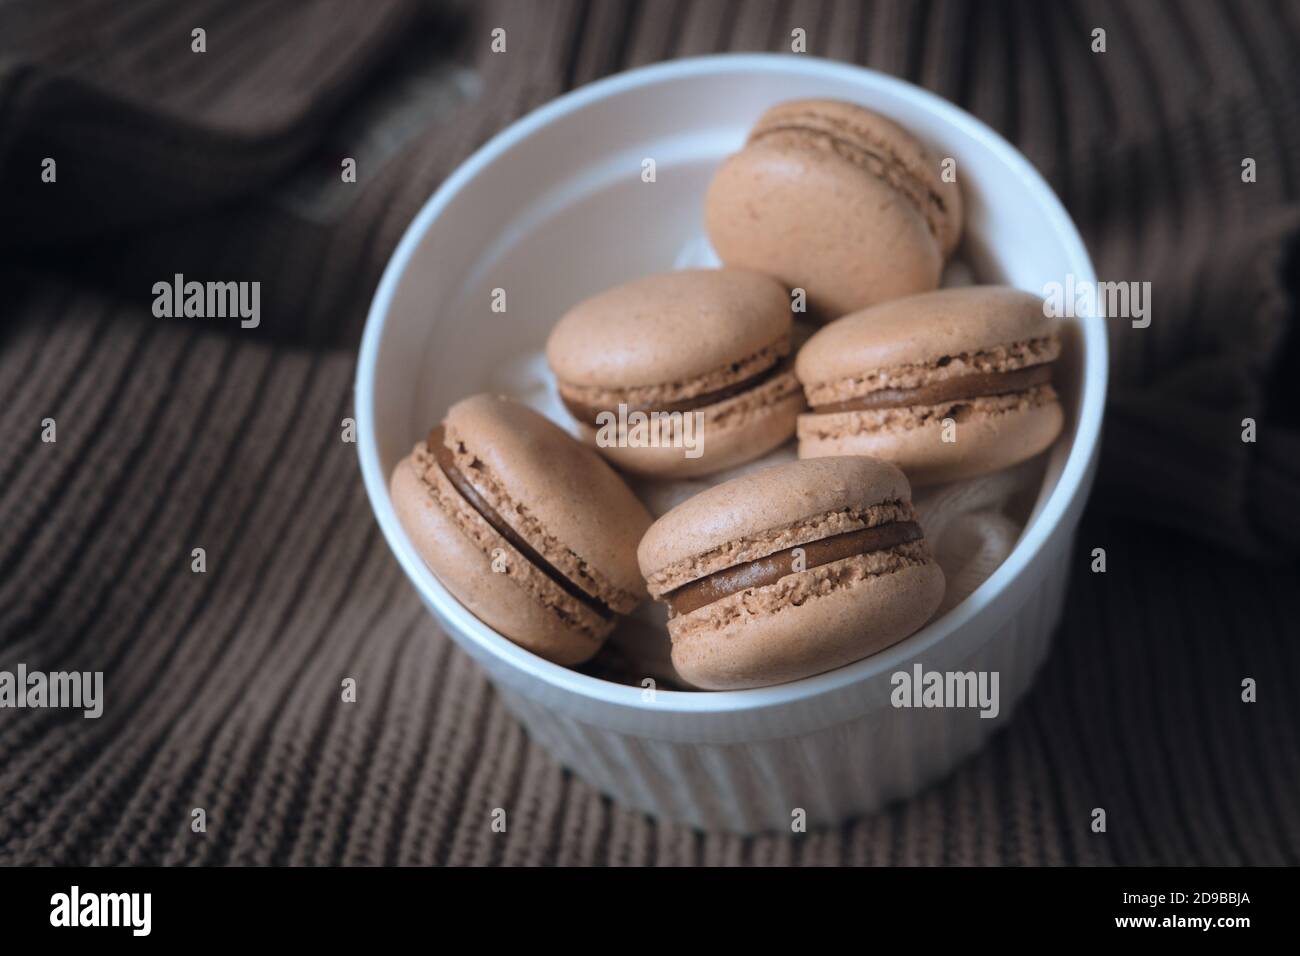 macaroons in a bowl.  caramel macaroons on a sweater. cozy autumn photography. photograph of food in brown tones. Stock Photo